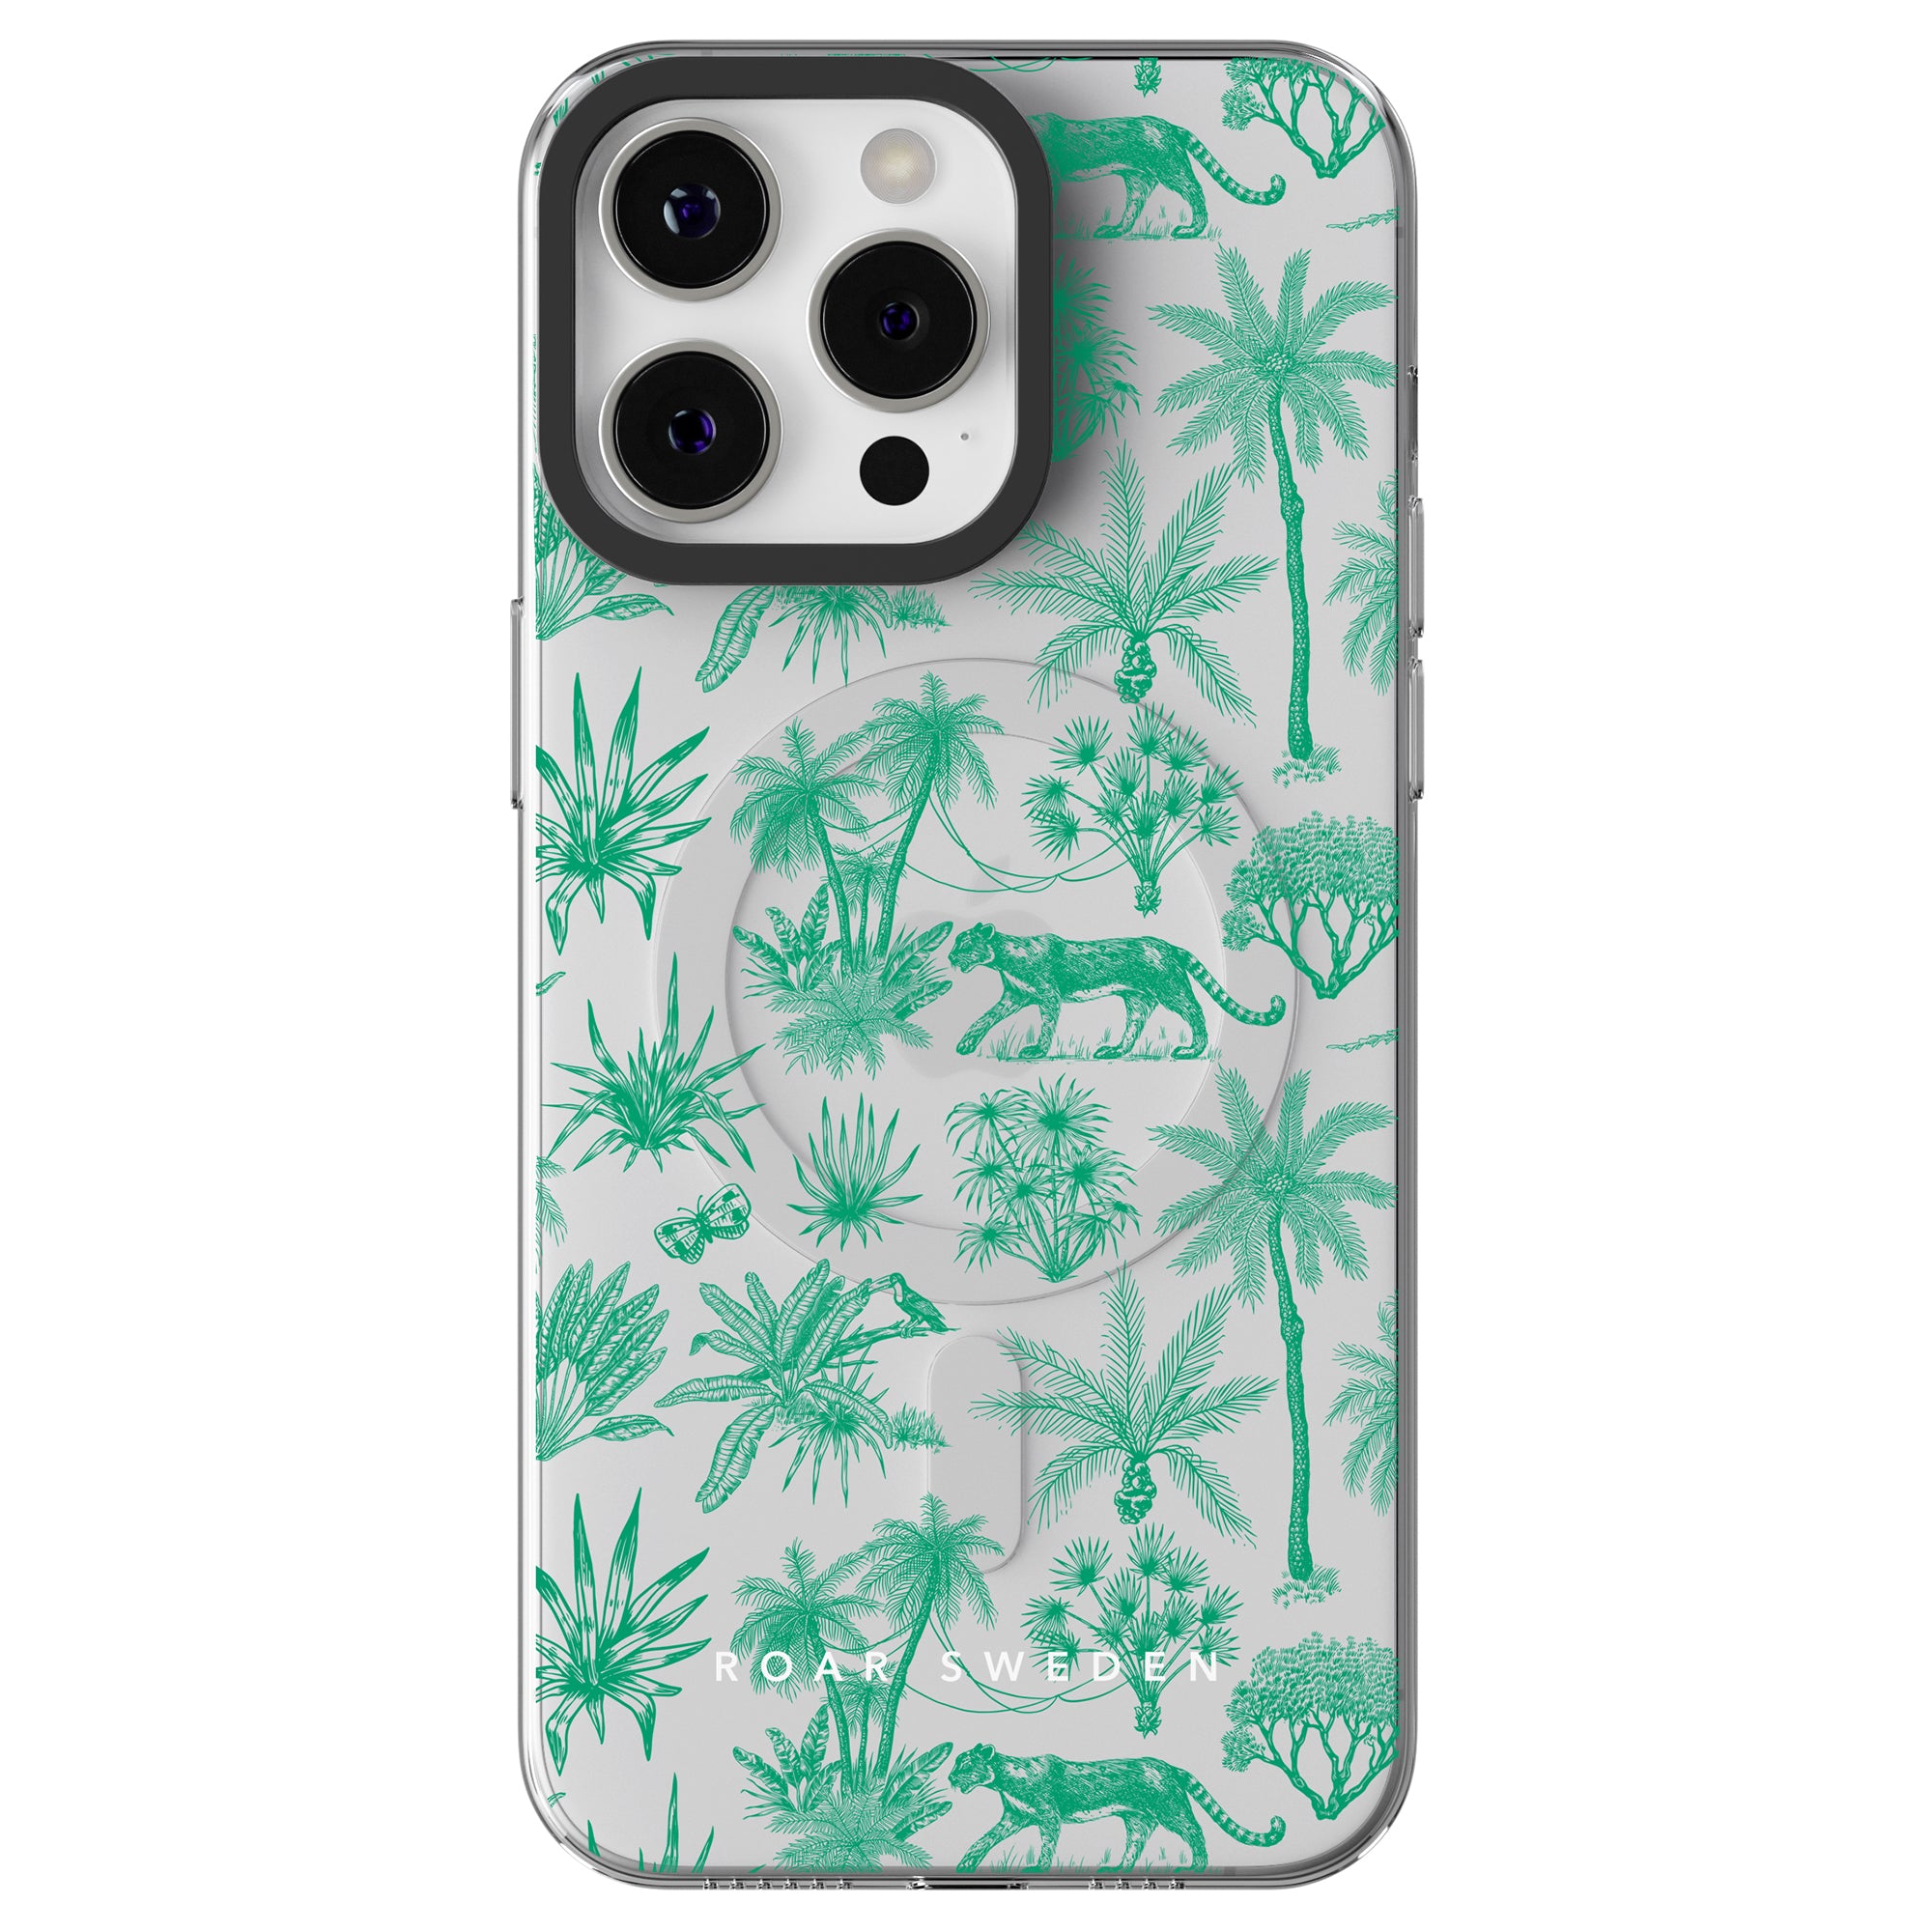 A tropical-themed iPhone case featuring green palm trees, plants, and wildlife illustrations with a touch of Toile De Jouy style. The camera module has three lenses and the case is MagSafe compatible. "Toile De Jouy Mint - MagSafe" is printed at the bottom, adding a unique flair.